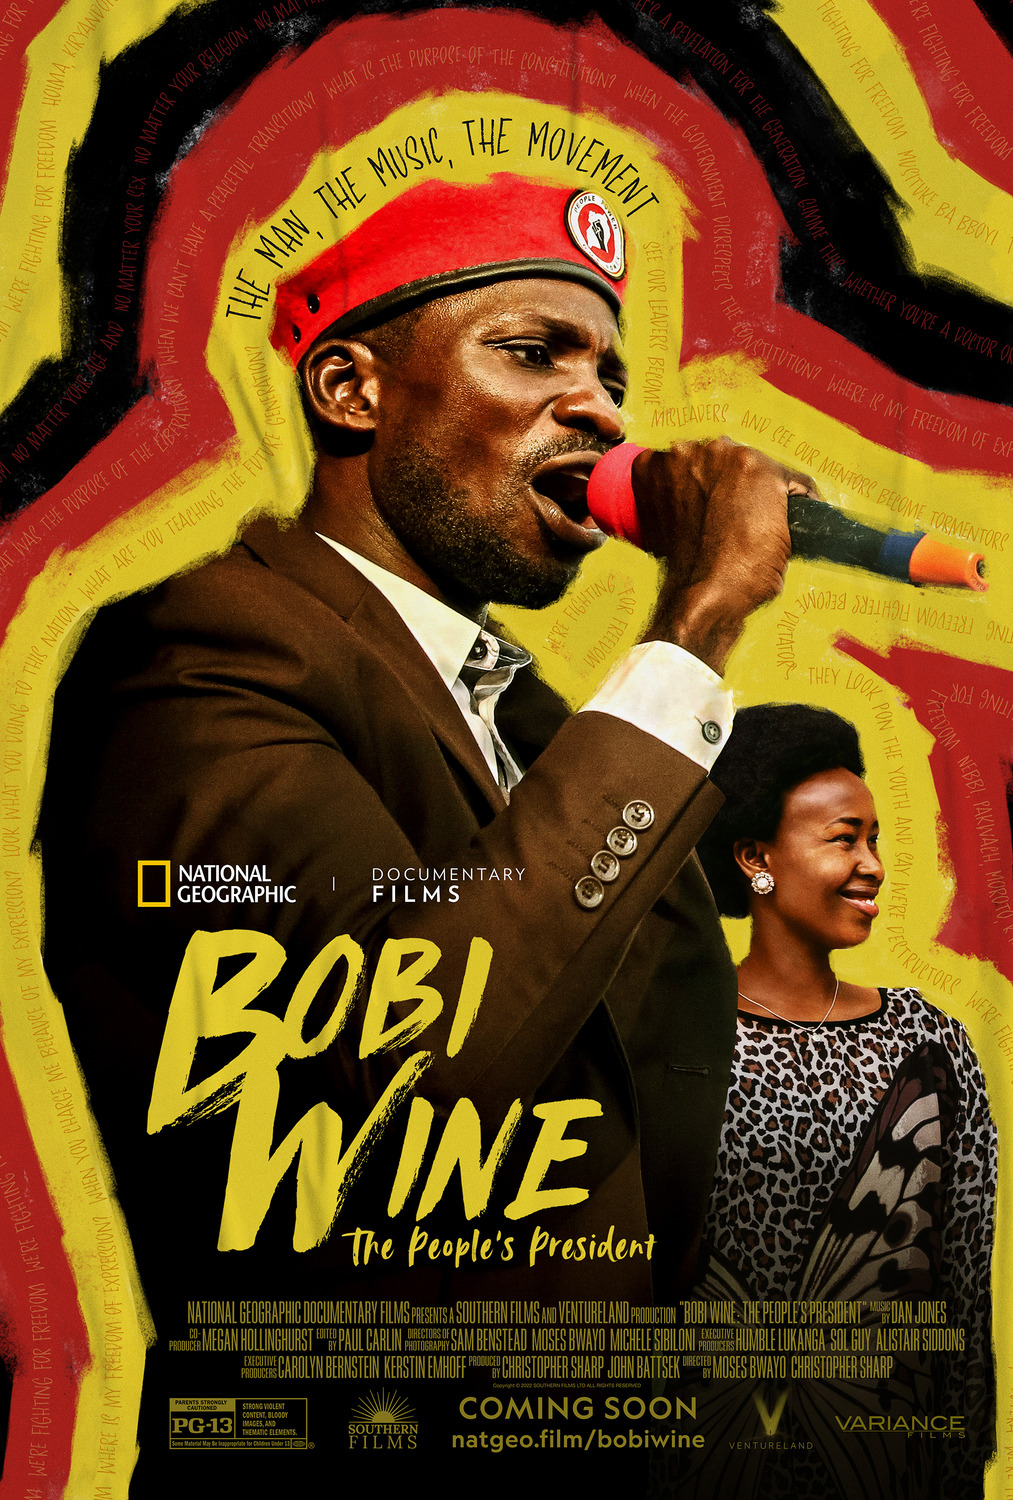 Extra Large Movie Poster Image for Bobi Wine: The People's President 